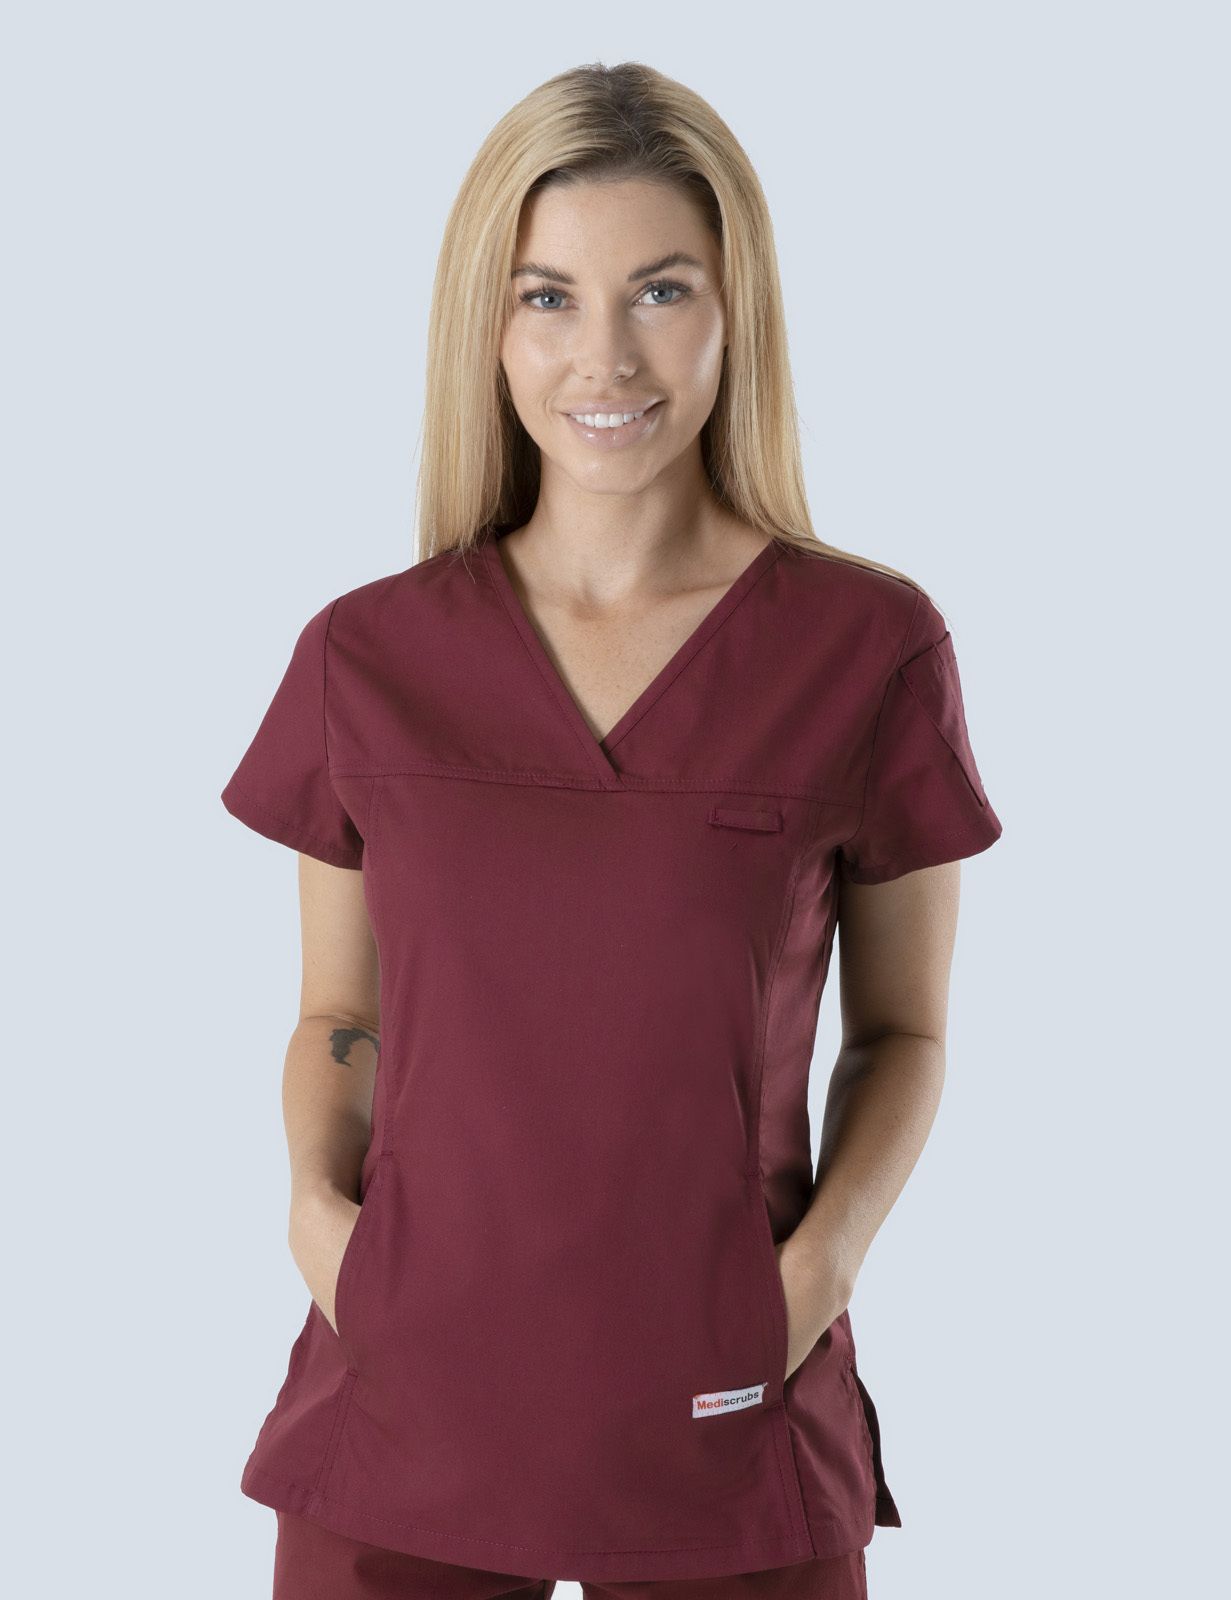 Maleny Hospital - Nursing Practitioner (Women's Fit Solid Scrub Top and Cargo Pants in Burgundy incl Logos)